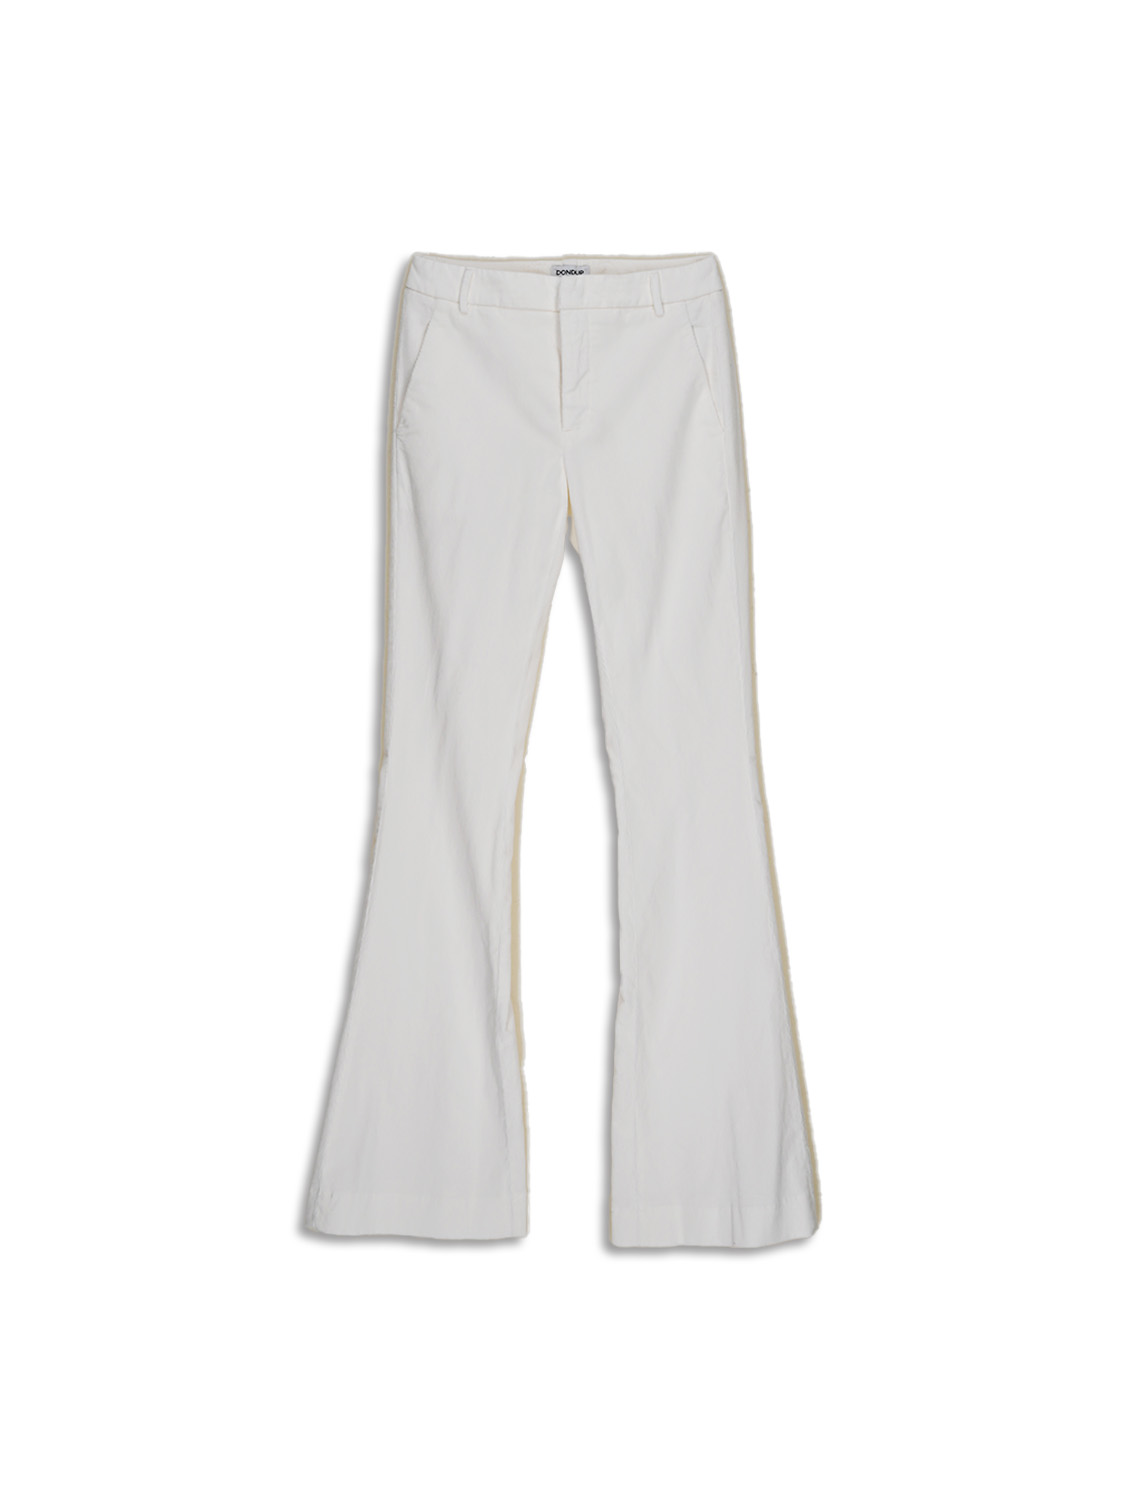 Cotton corduroy trousers with straight leg